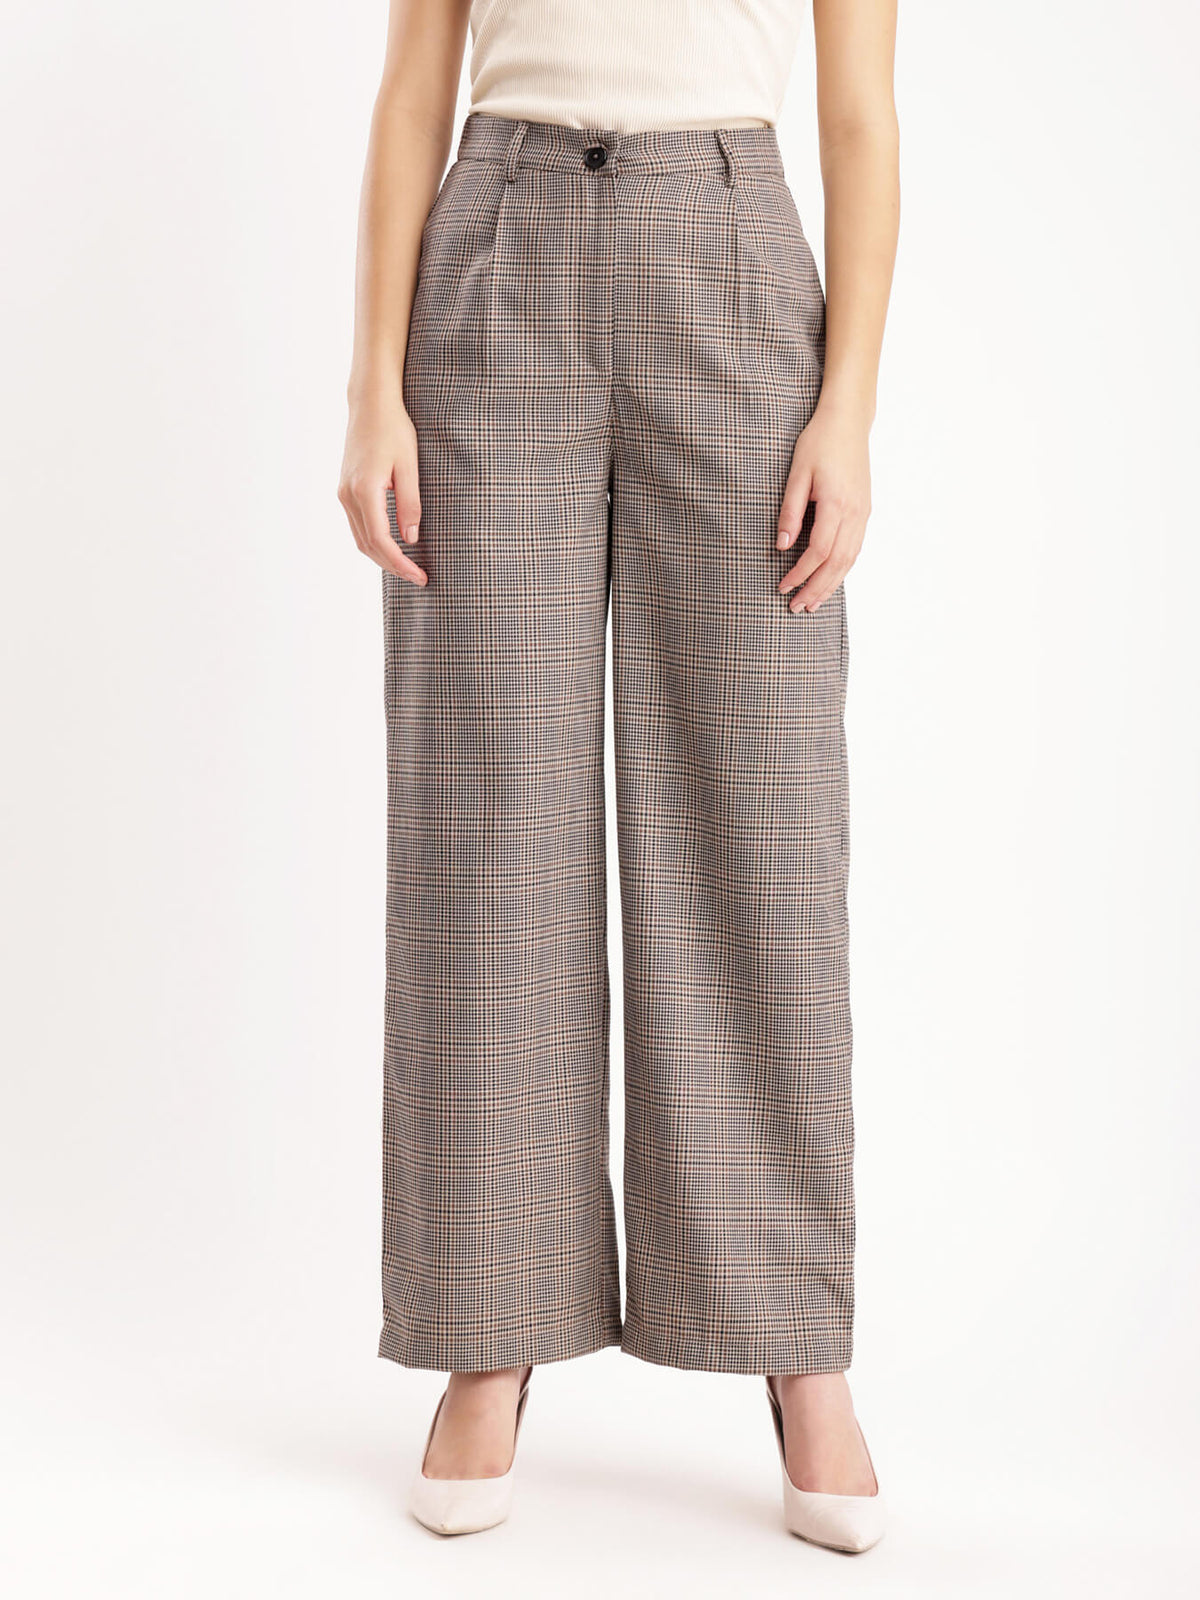 Checkered Trousers - Brown And Black